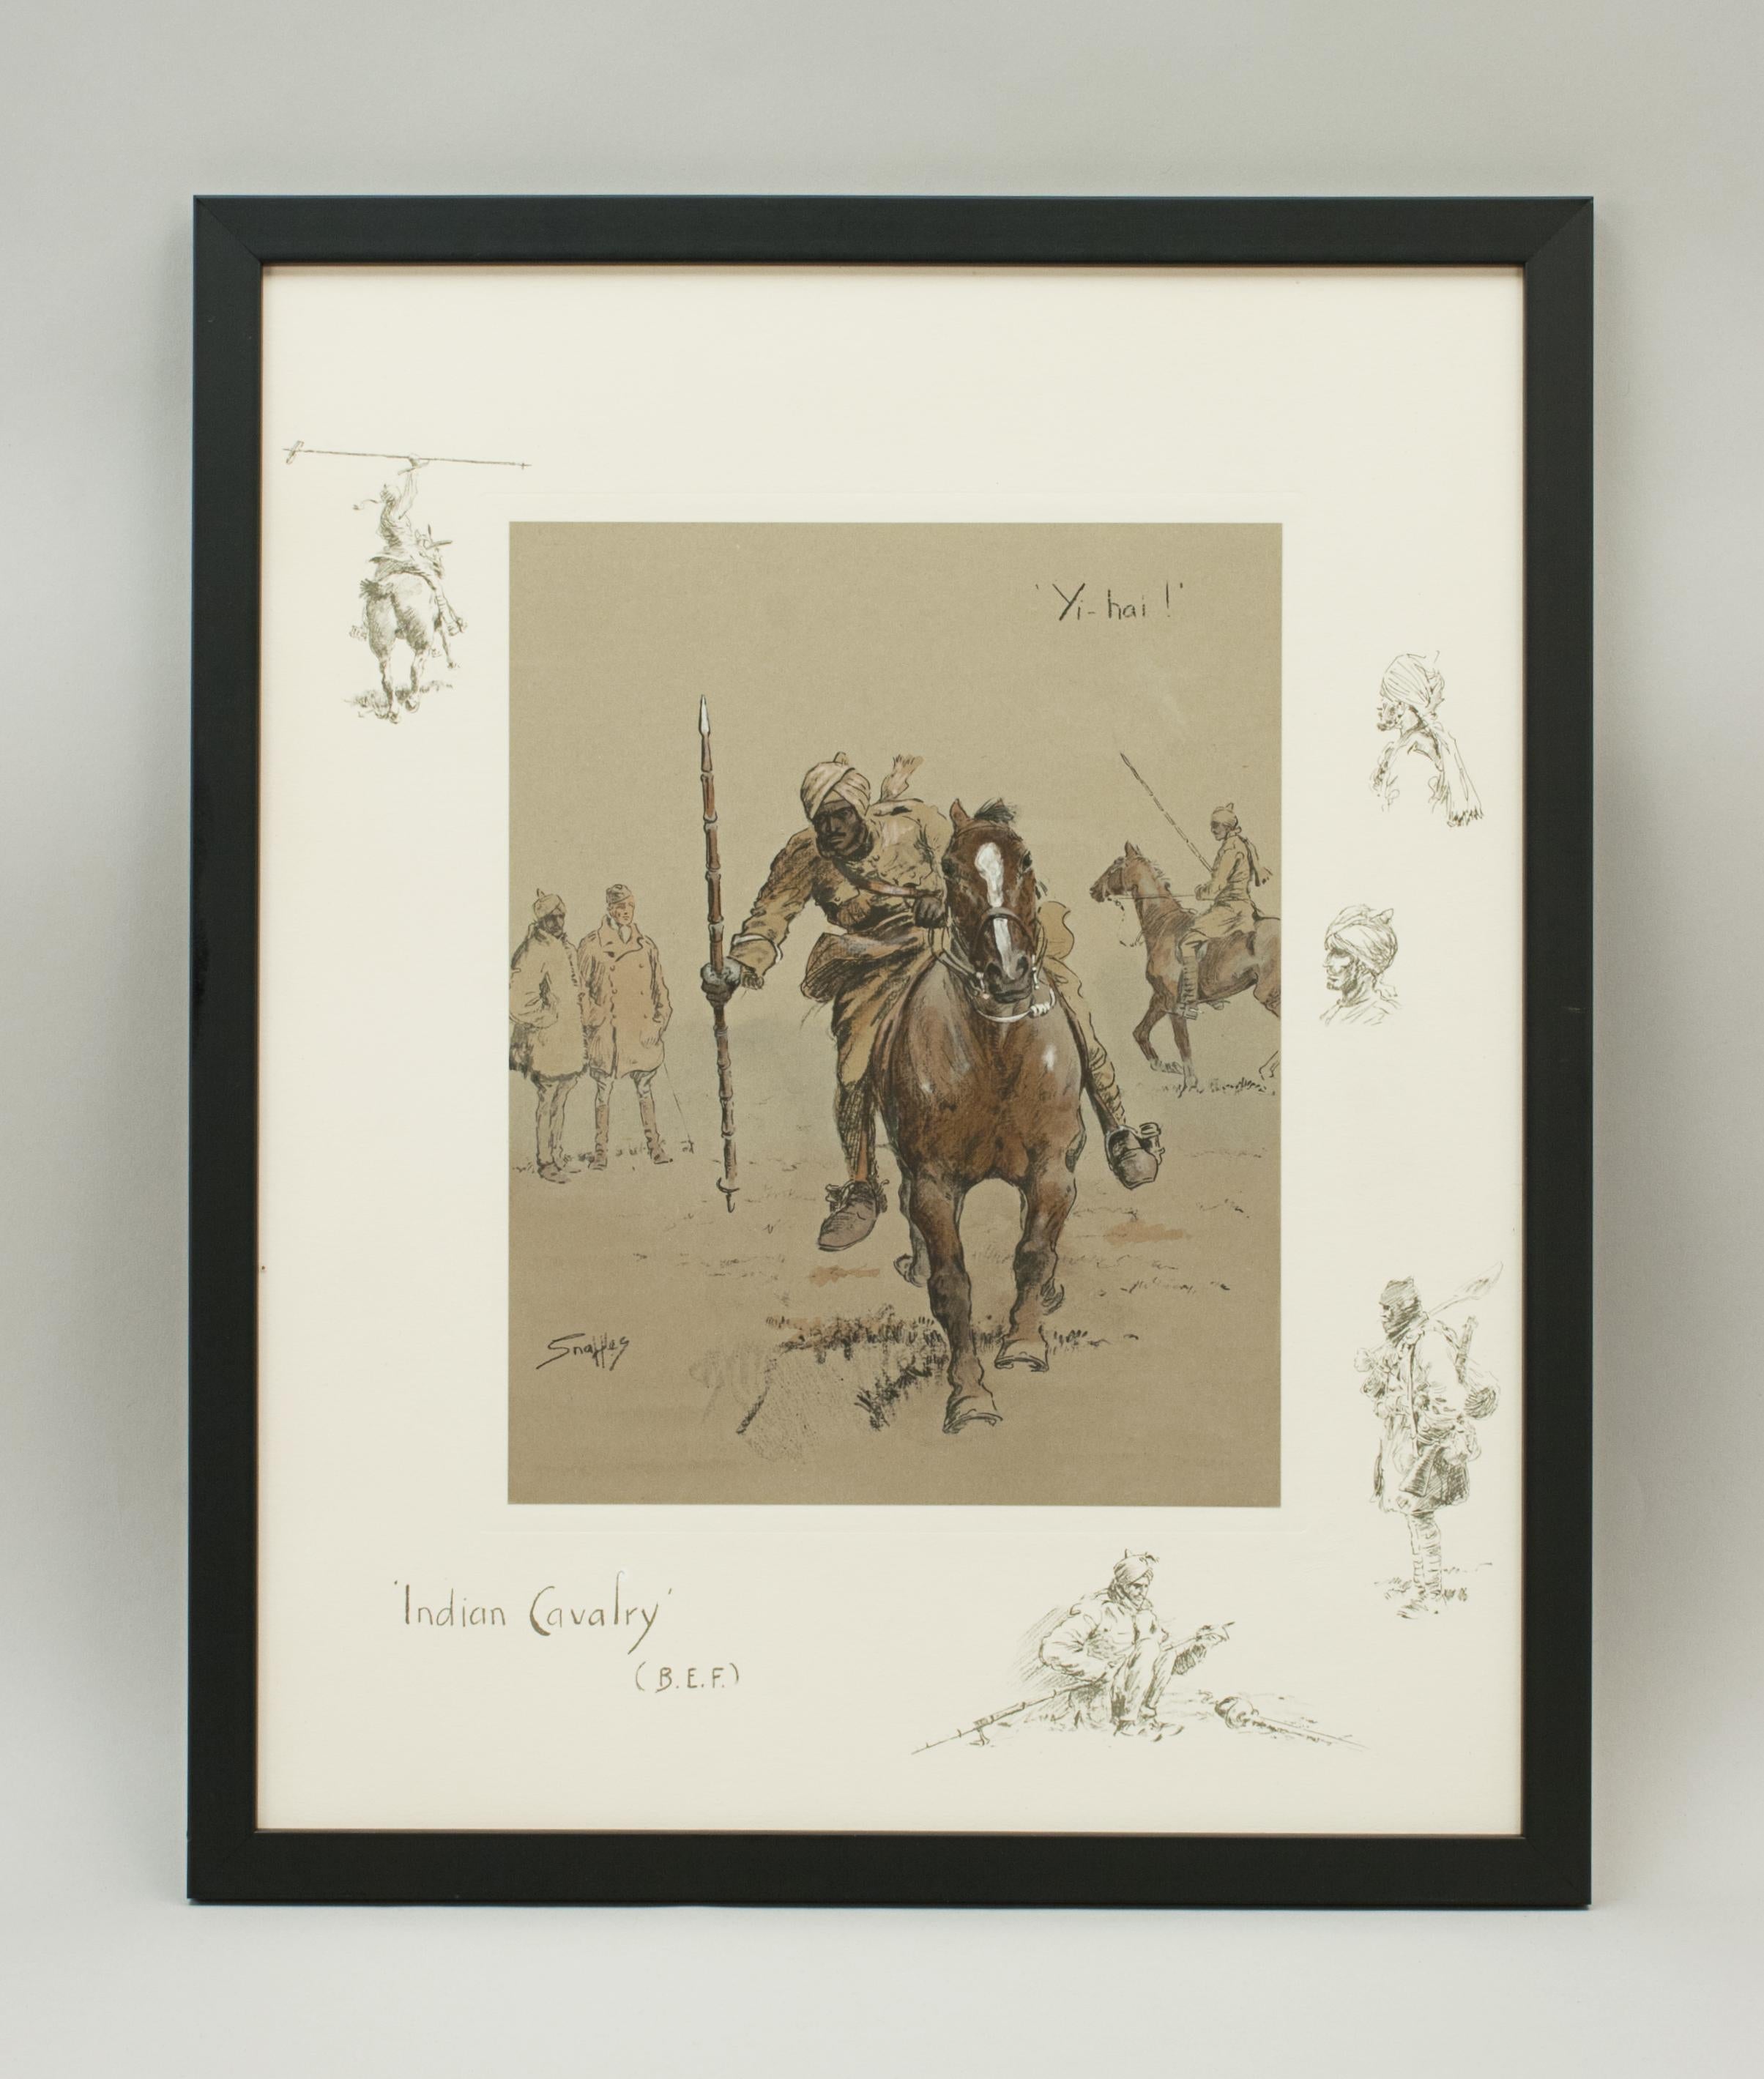 Snaffles WWI Military print, Yi-Hai!, Indian cavalry.
A good snaffles WWI military print 'Indian Cavalry (B.E.F.)', 'Yi - hai!' The snaffles hand colored lithograph is with the snaffles blindstamp and in a new black frame. The main picture shows a